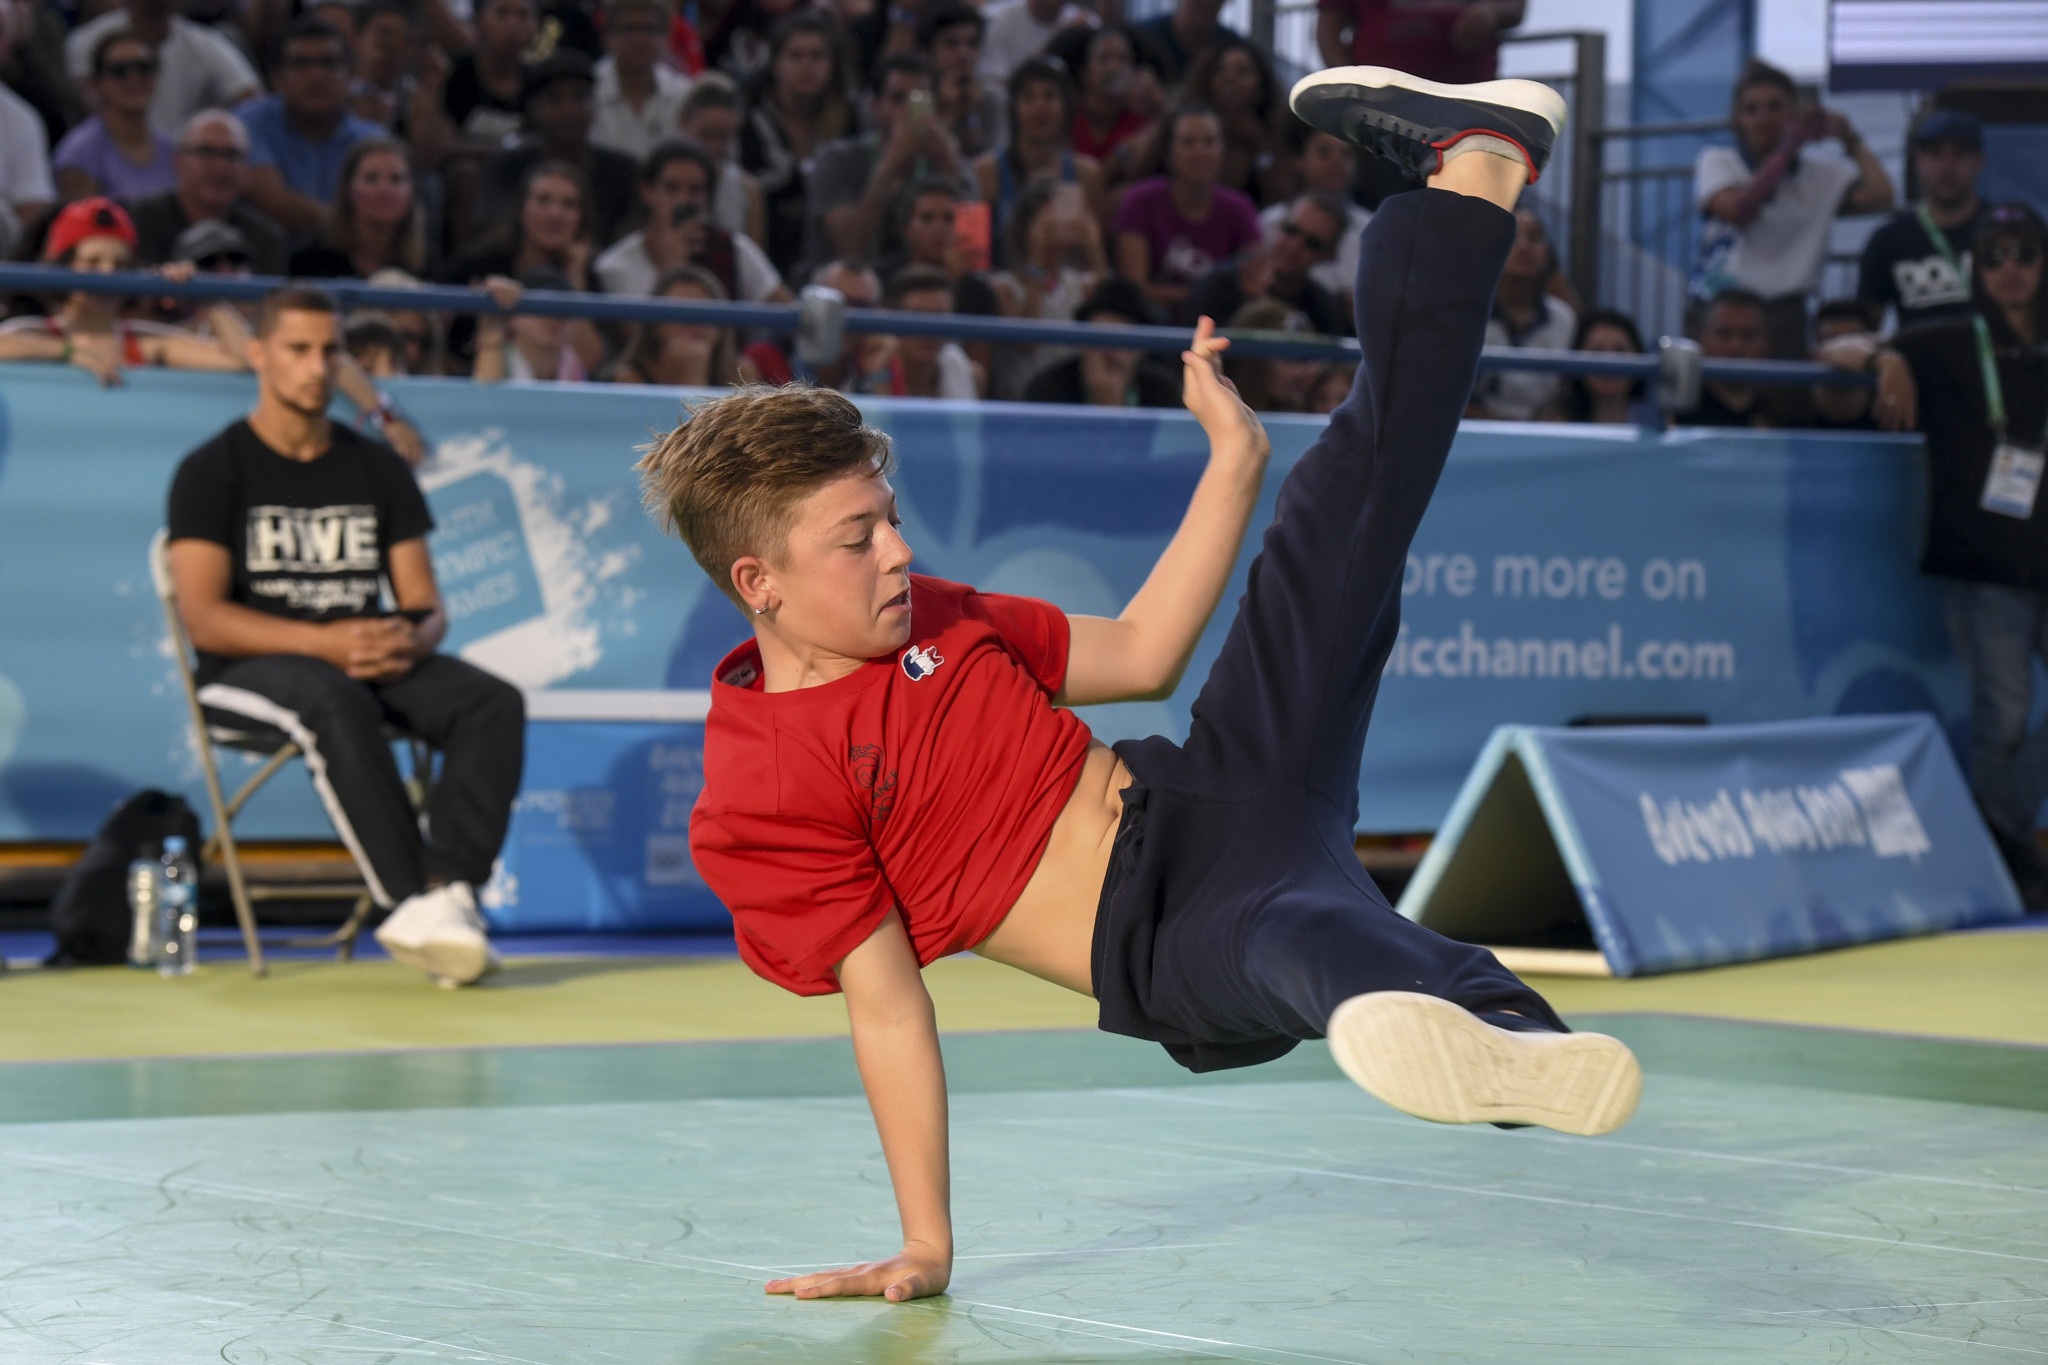 Breakdancing is in line for Paris 2024 after appearing at Buenos Aires 2018 ©Getty Images